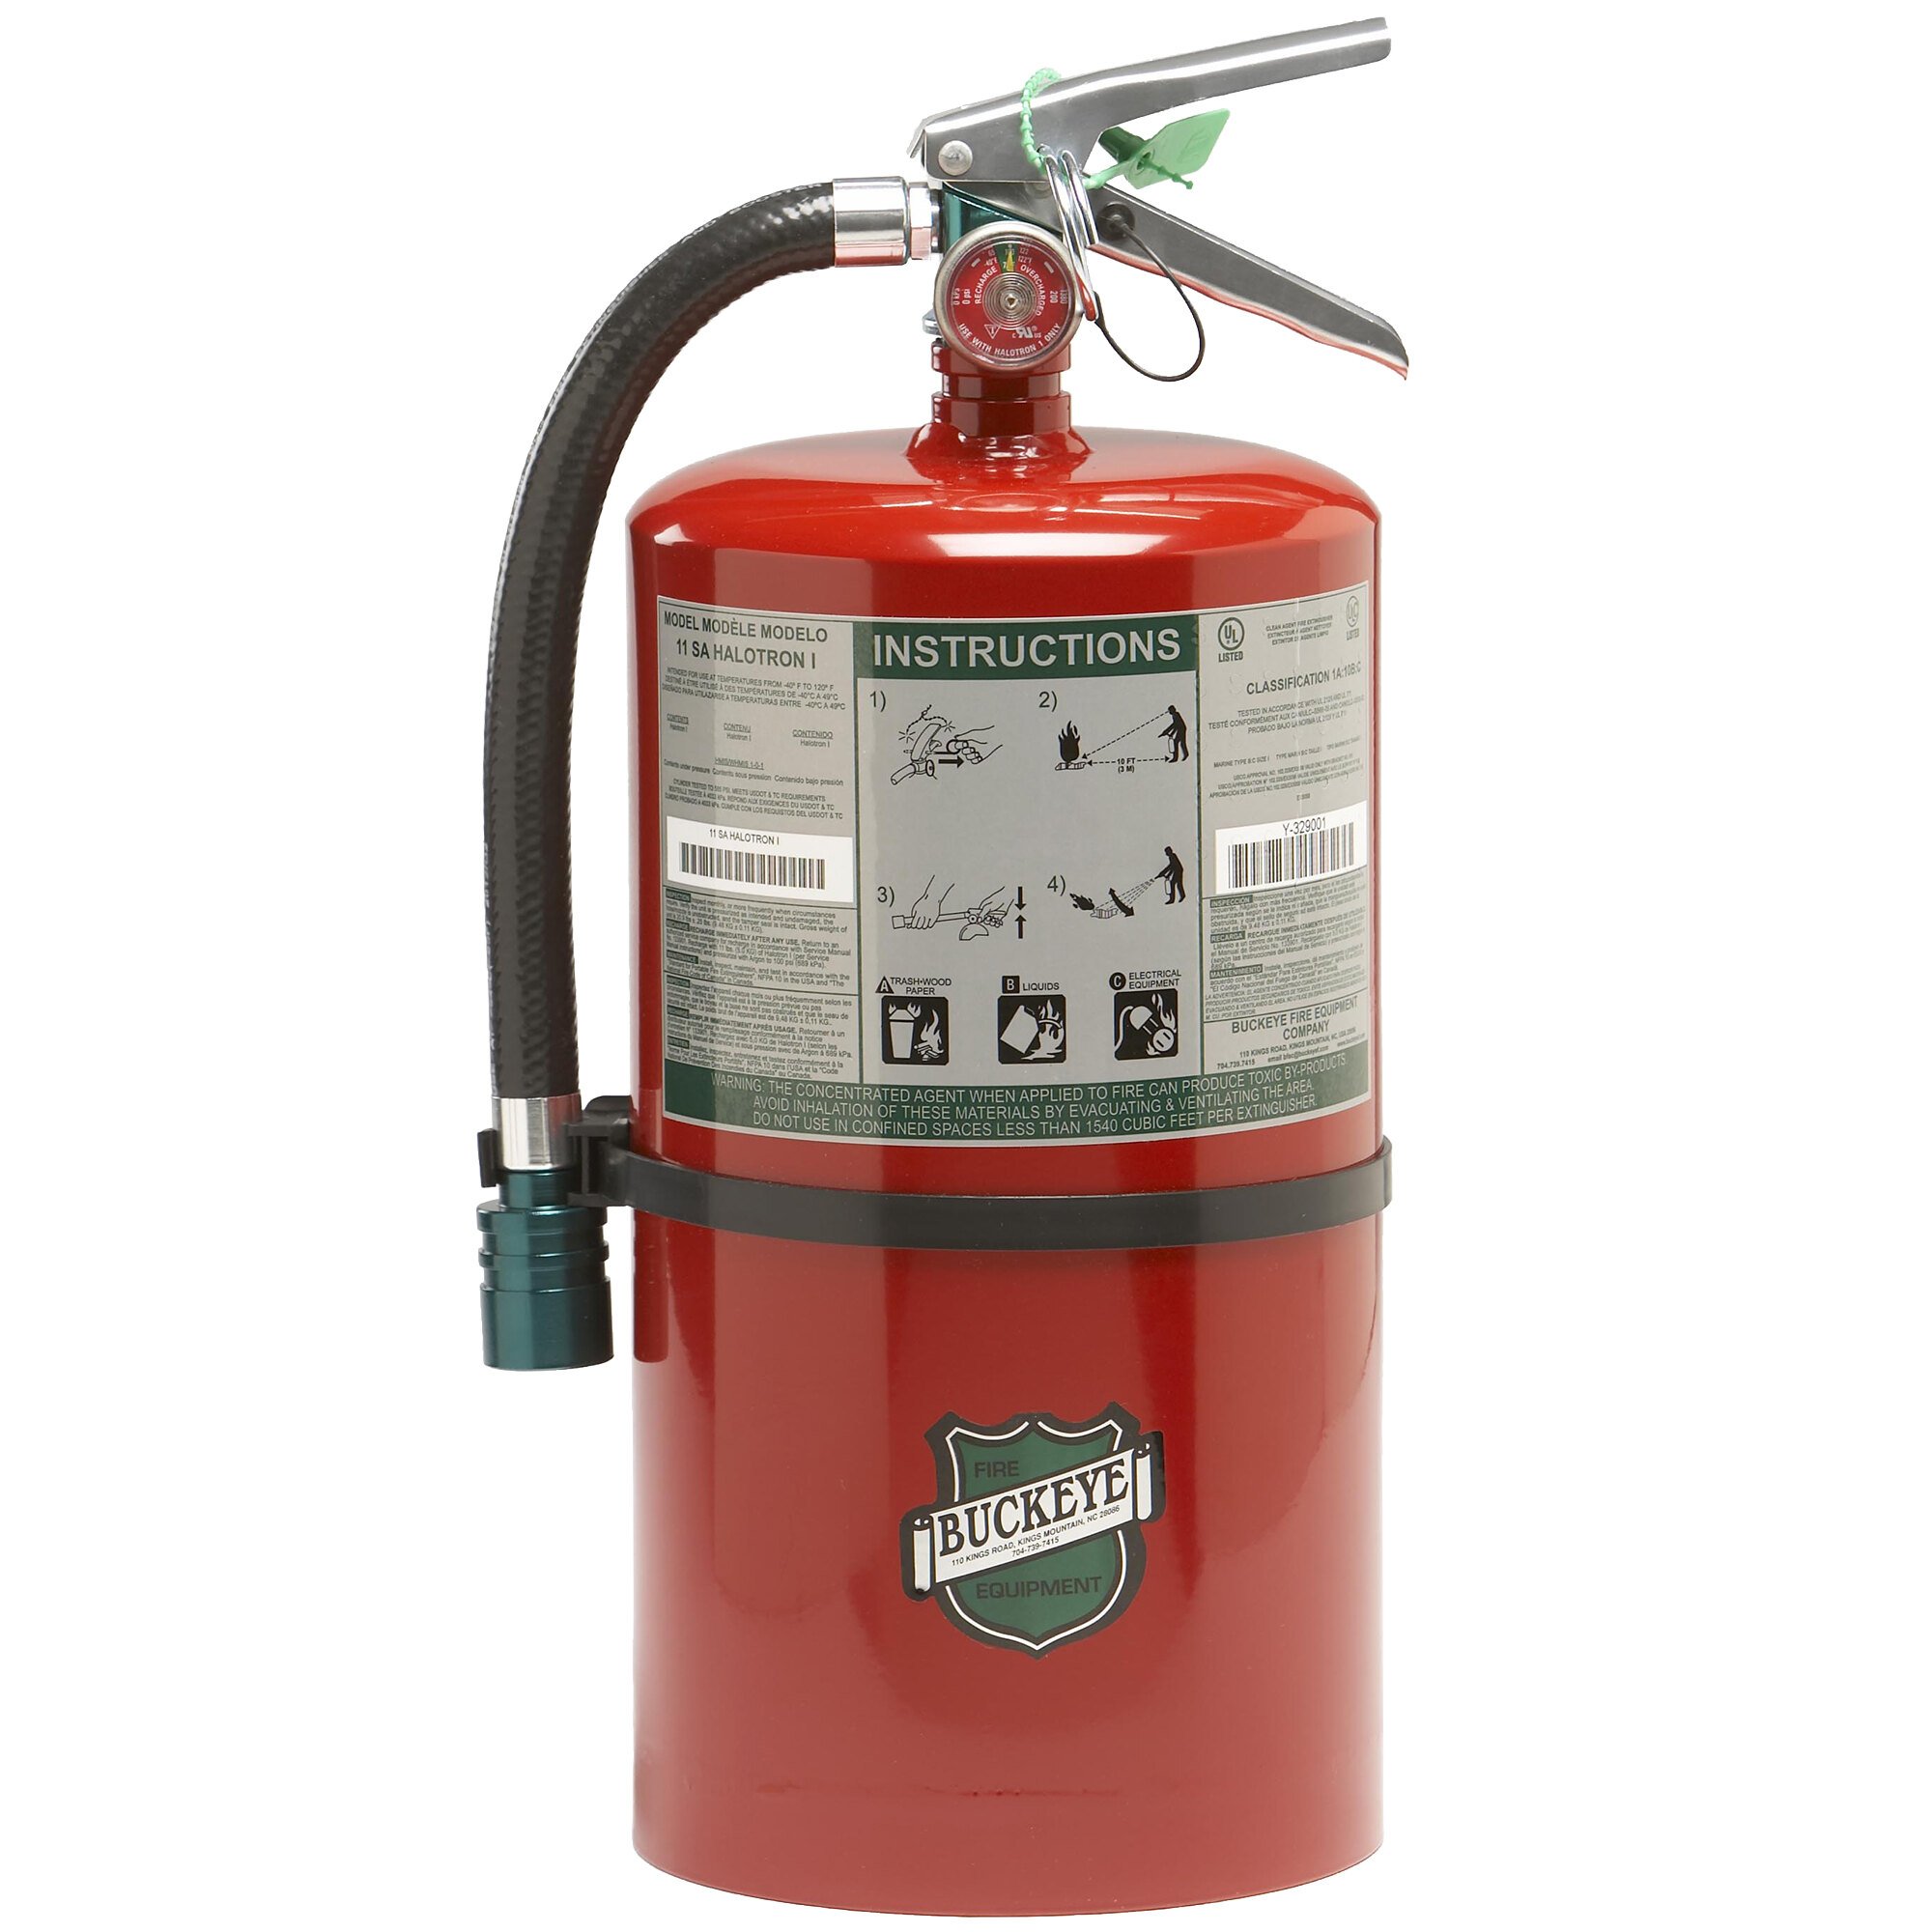 Buckeye 15.5 lb. Halotron Fire Extinguisher Rechargeable Untagged